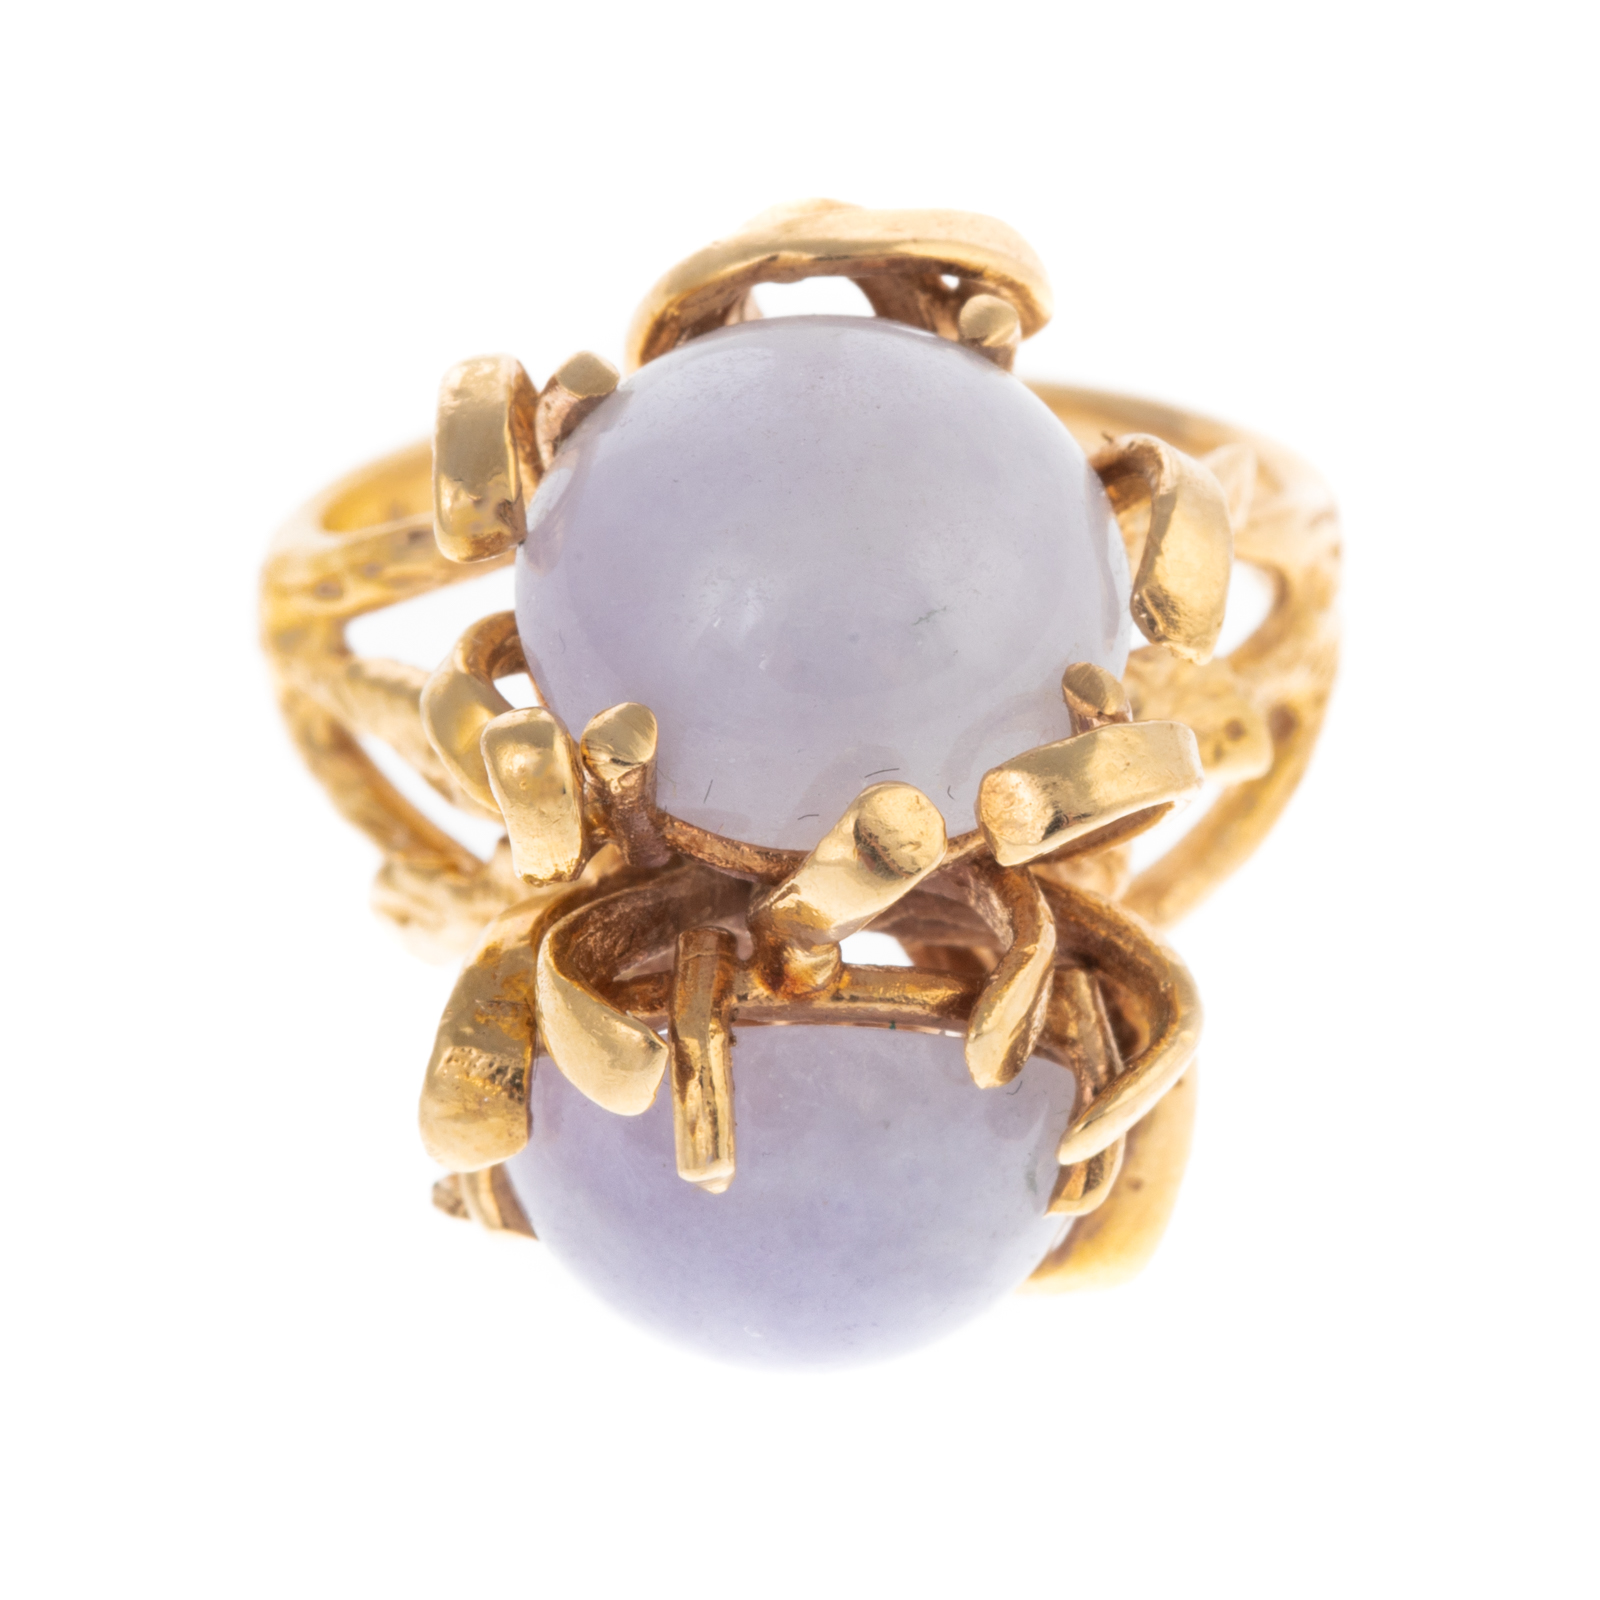 A LAVENDER JADE RING IN 14K YELLOW 338533